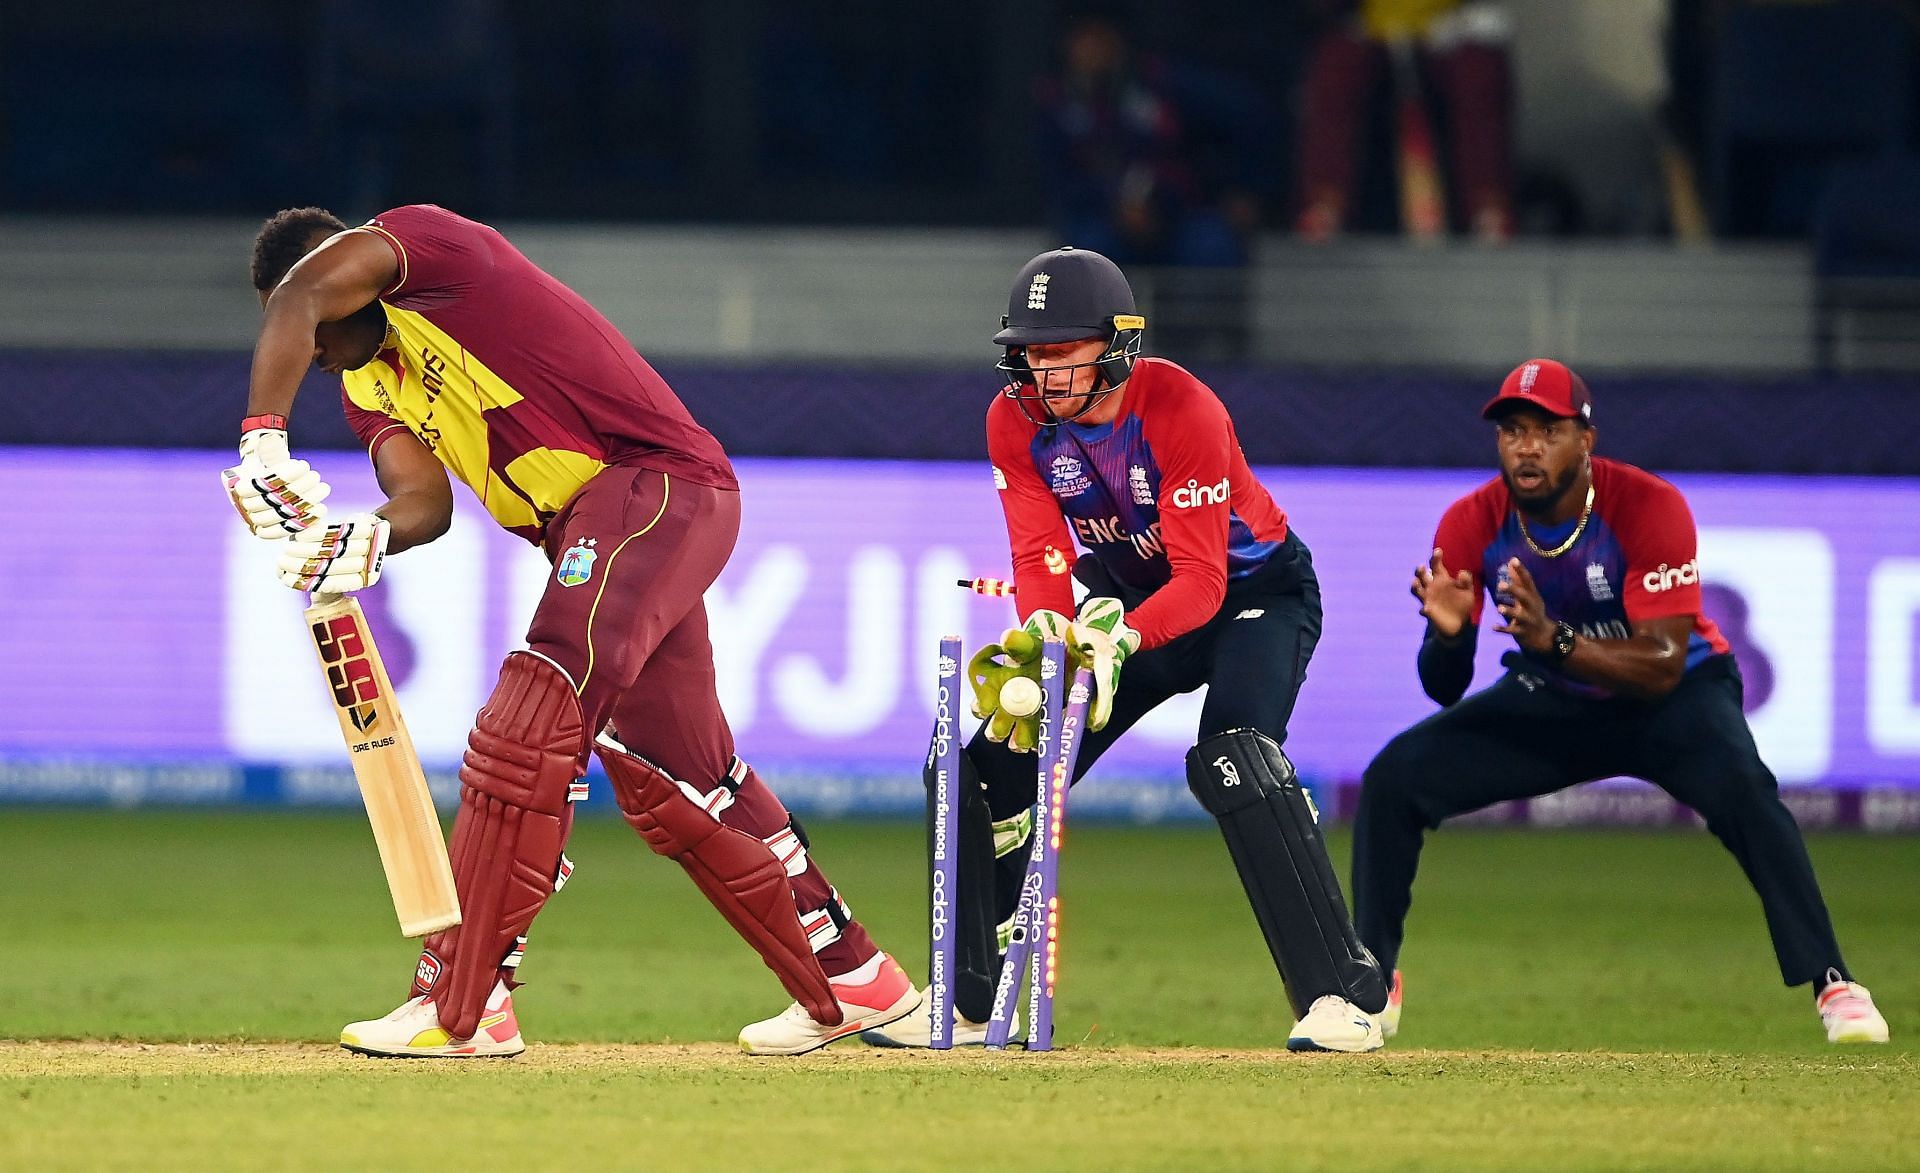 The West Indies suffered a batting collapse against England